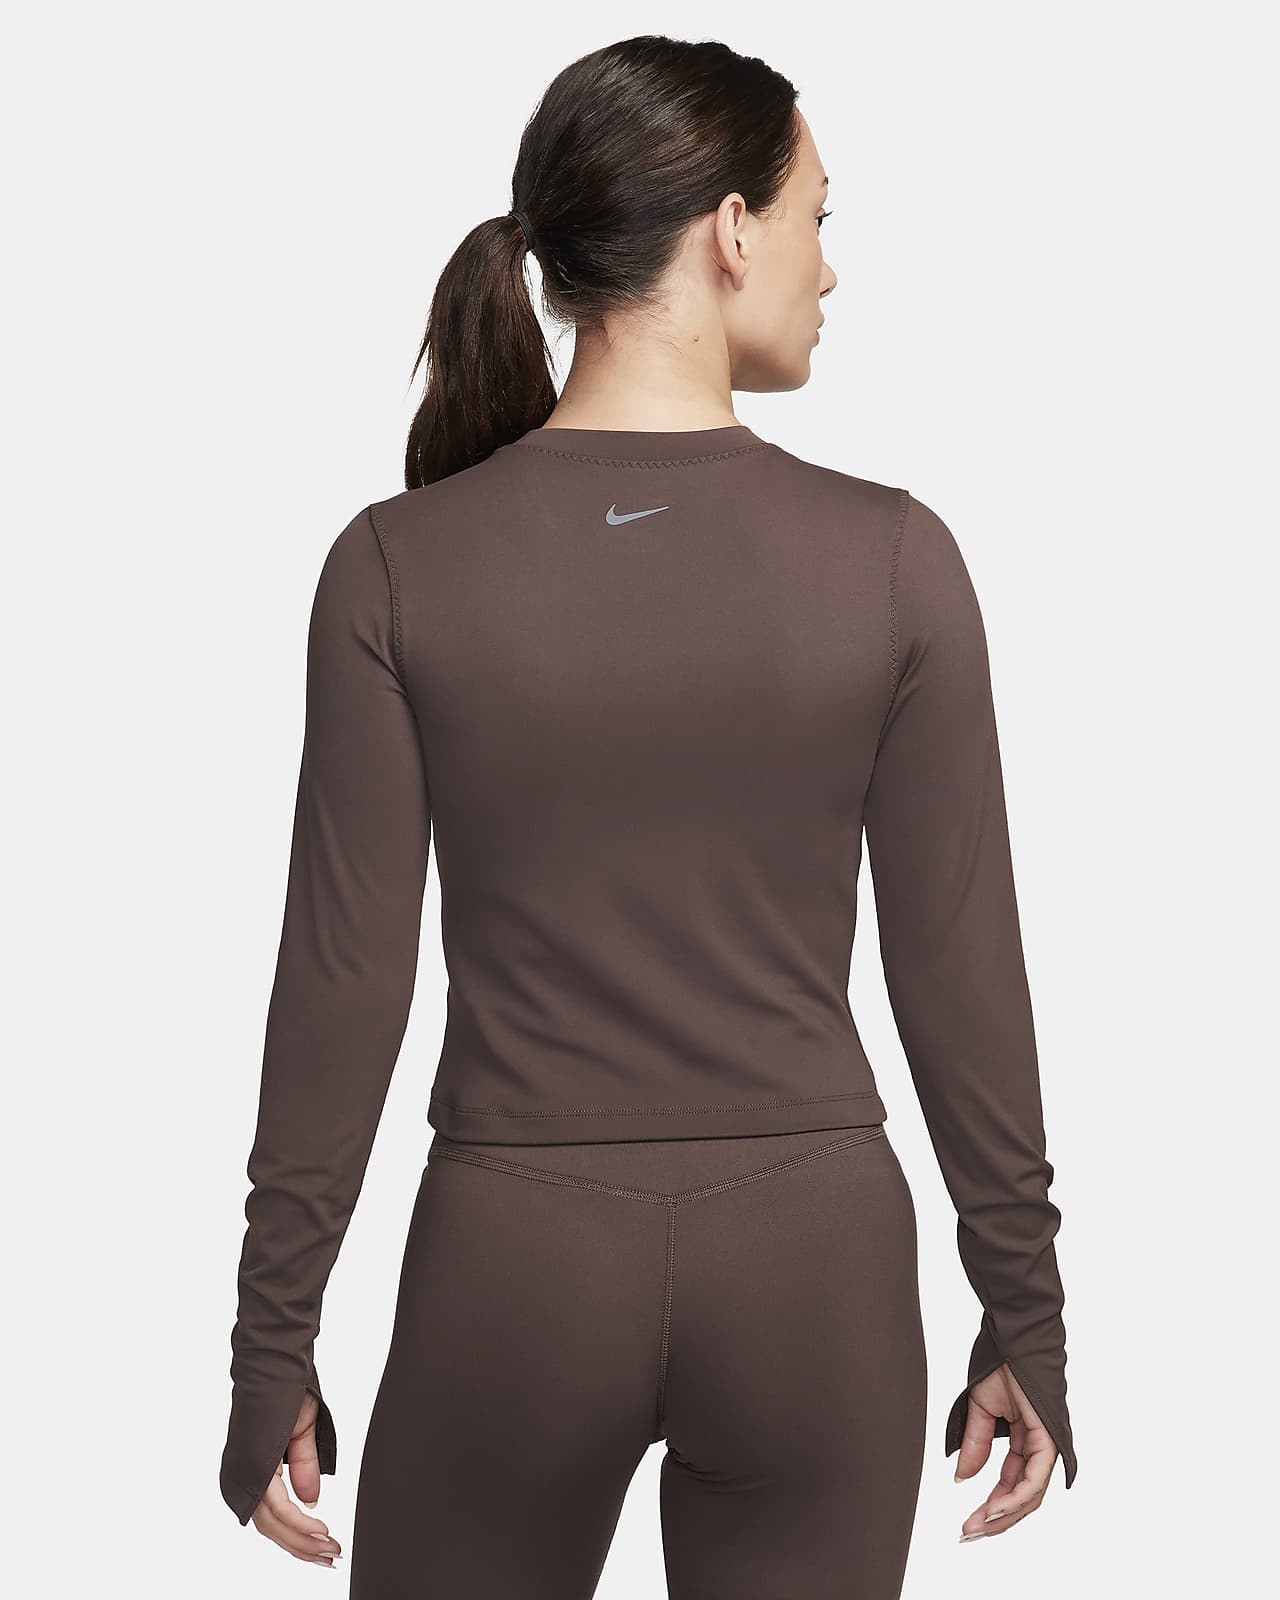 Nike One Fitted Women's Dri-FIT Long-Sleeve Top. Nike CA